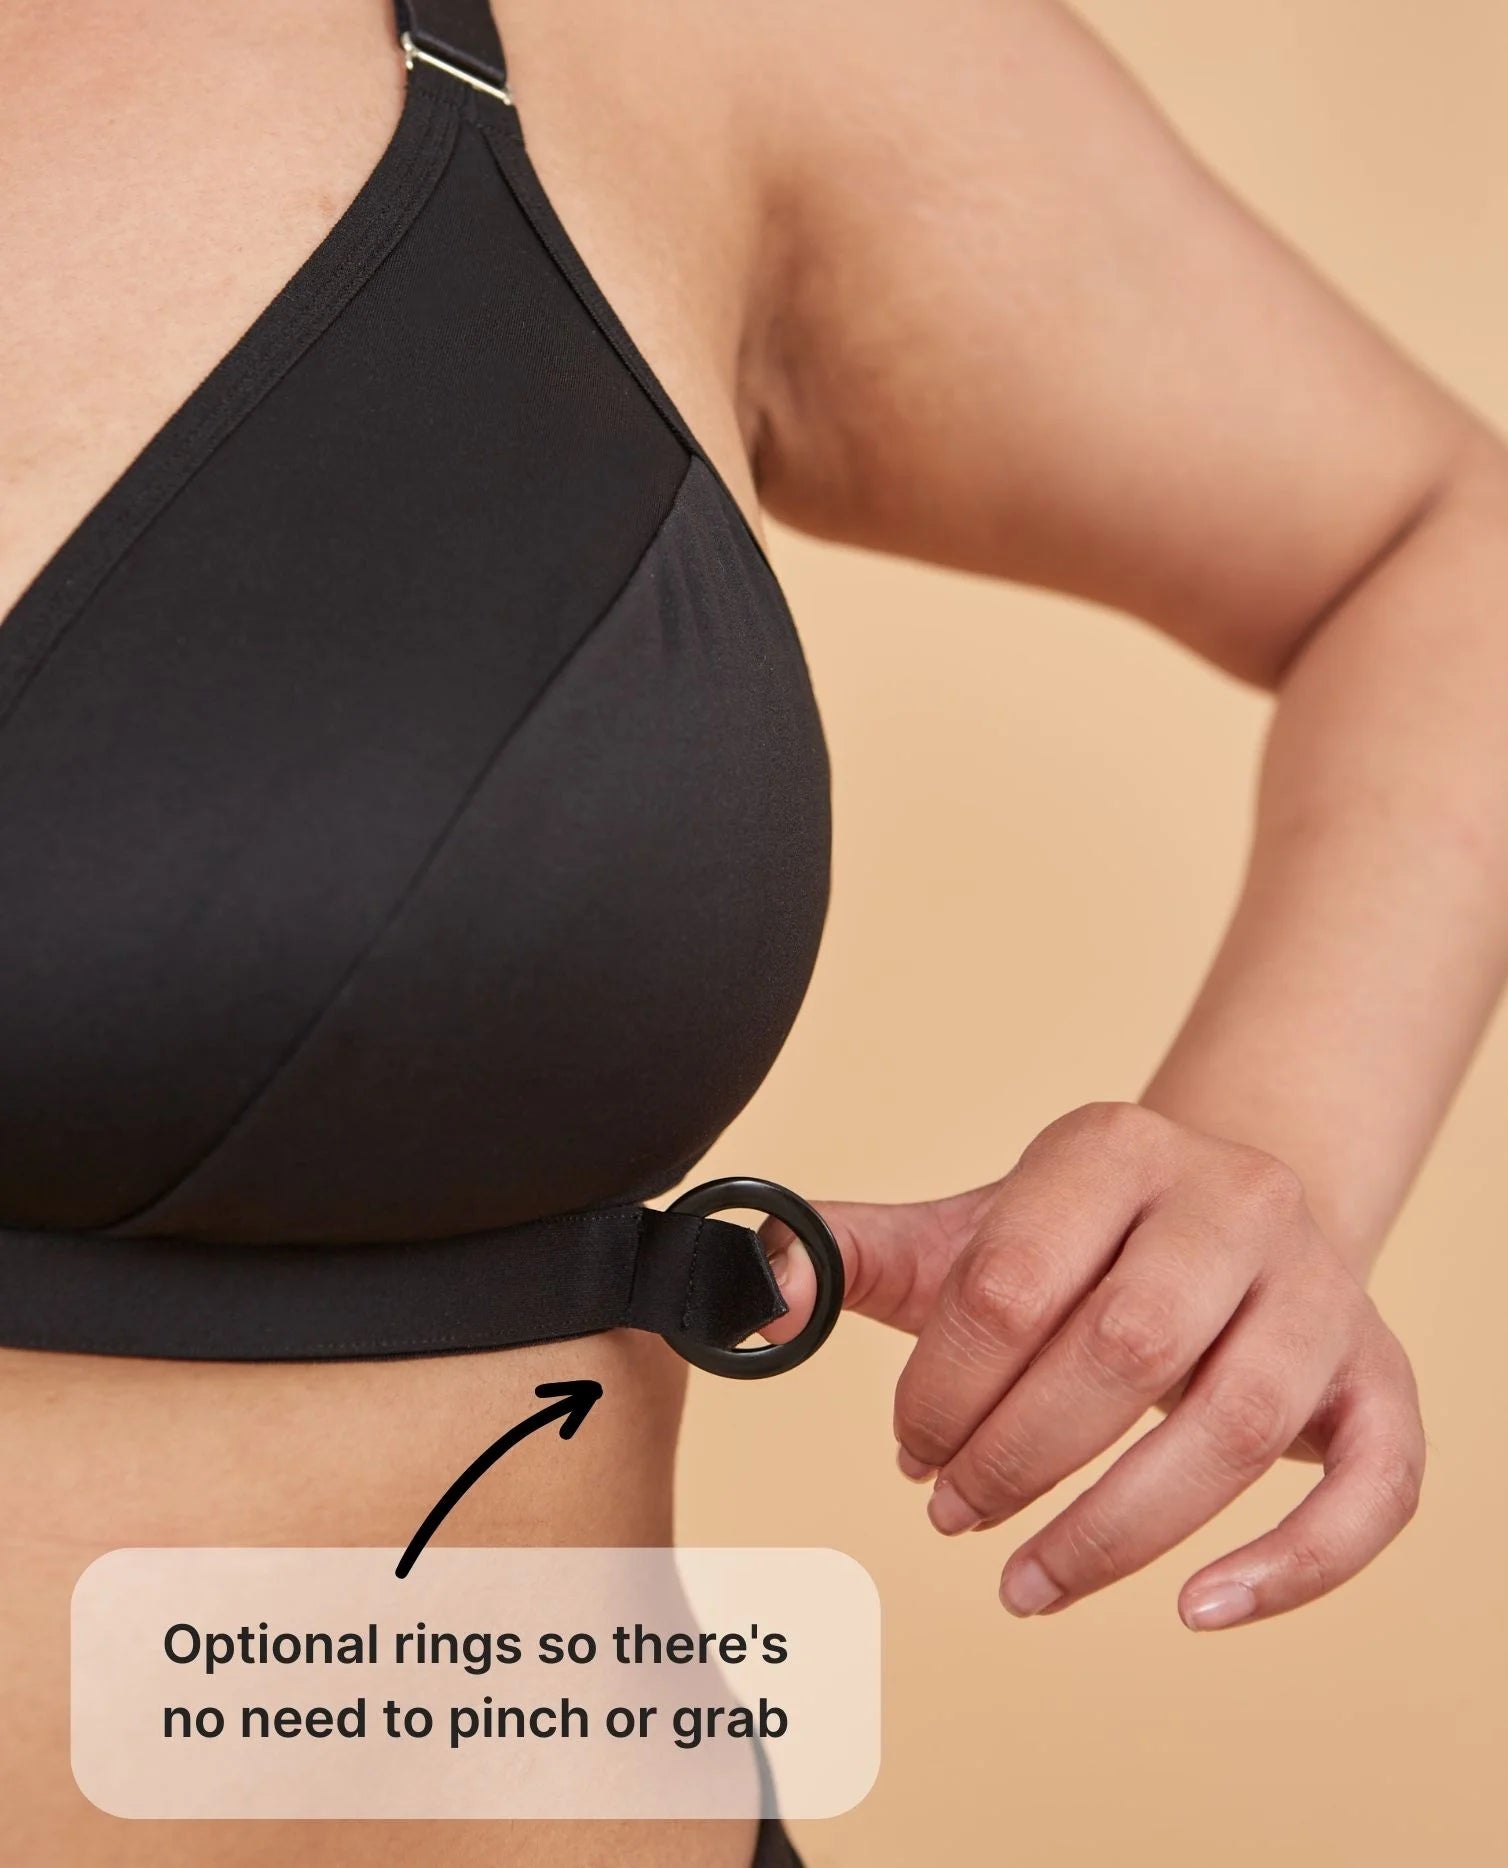 This is the EASIEST bra to put on. For women with arthritis, shoulder